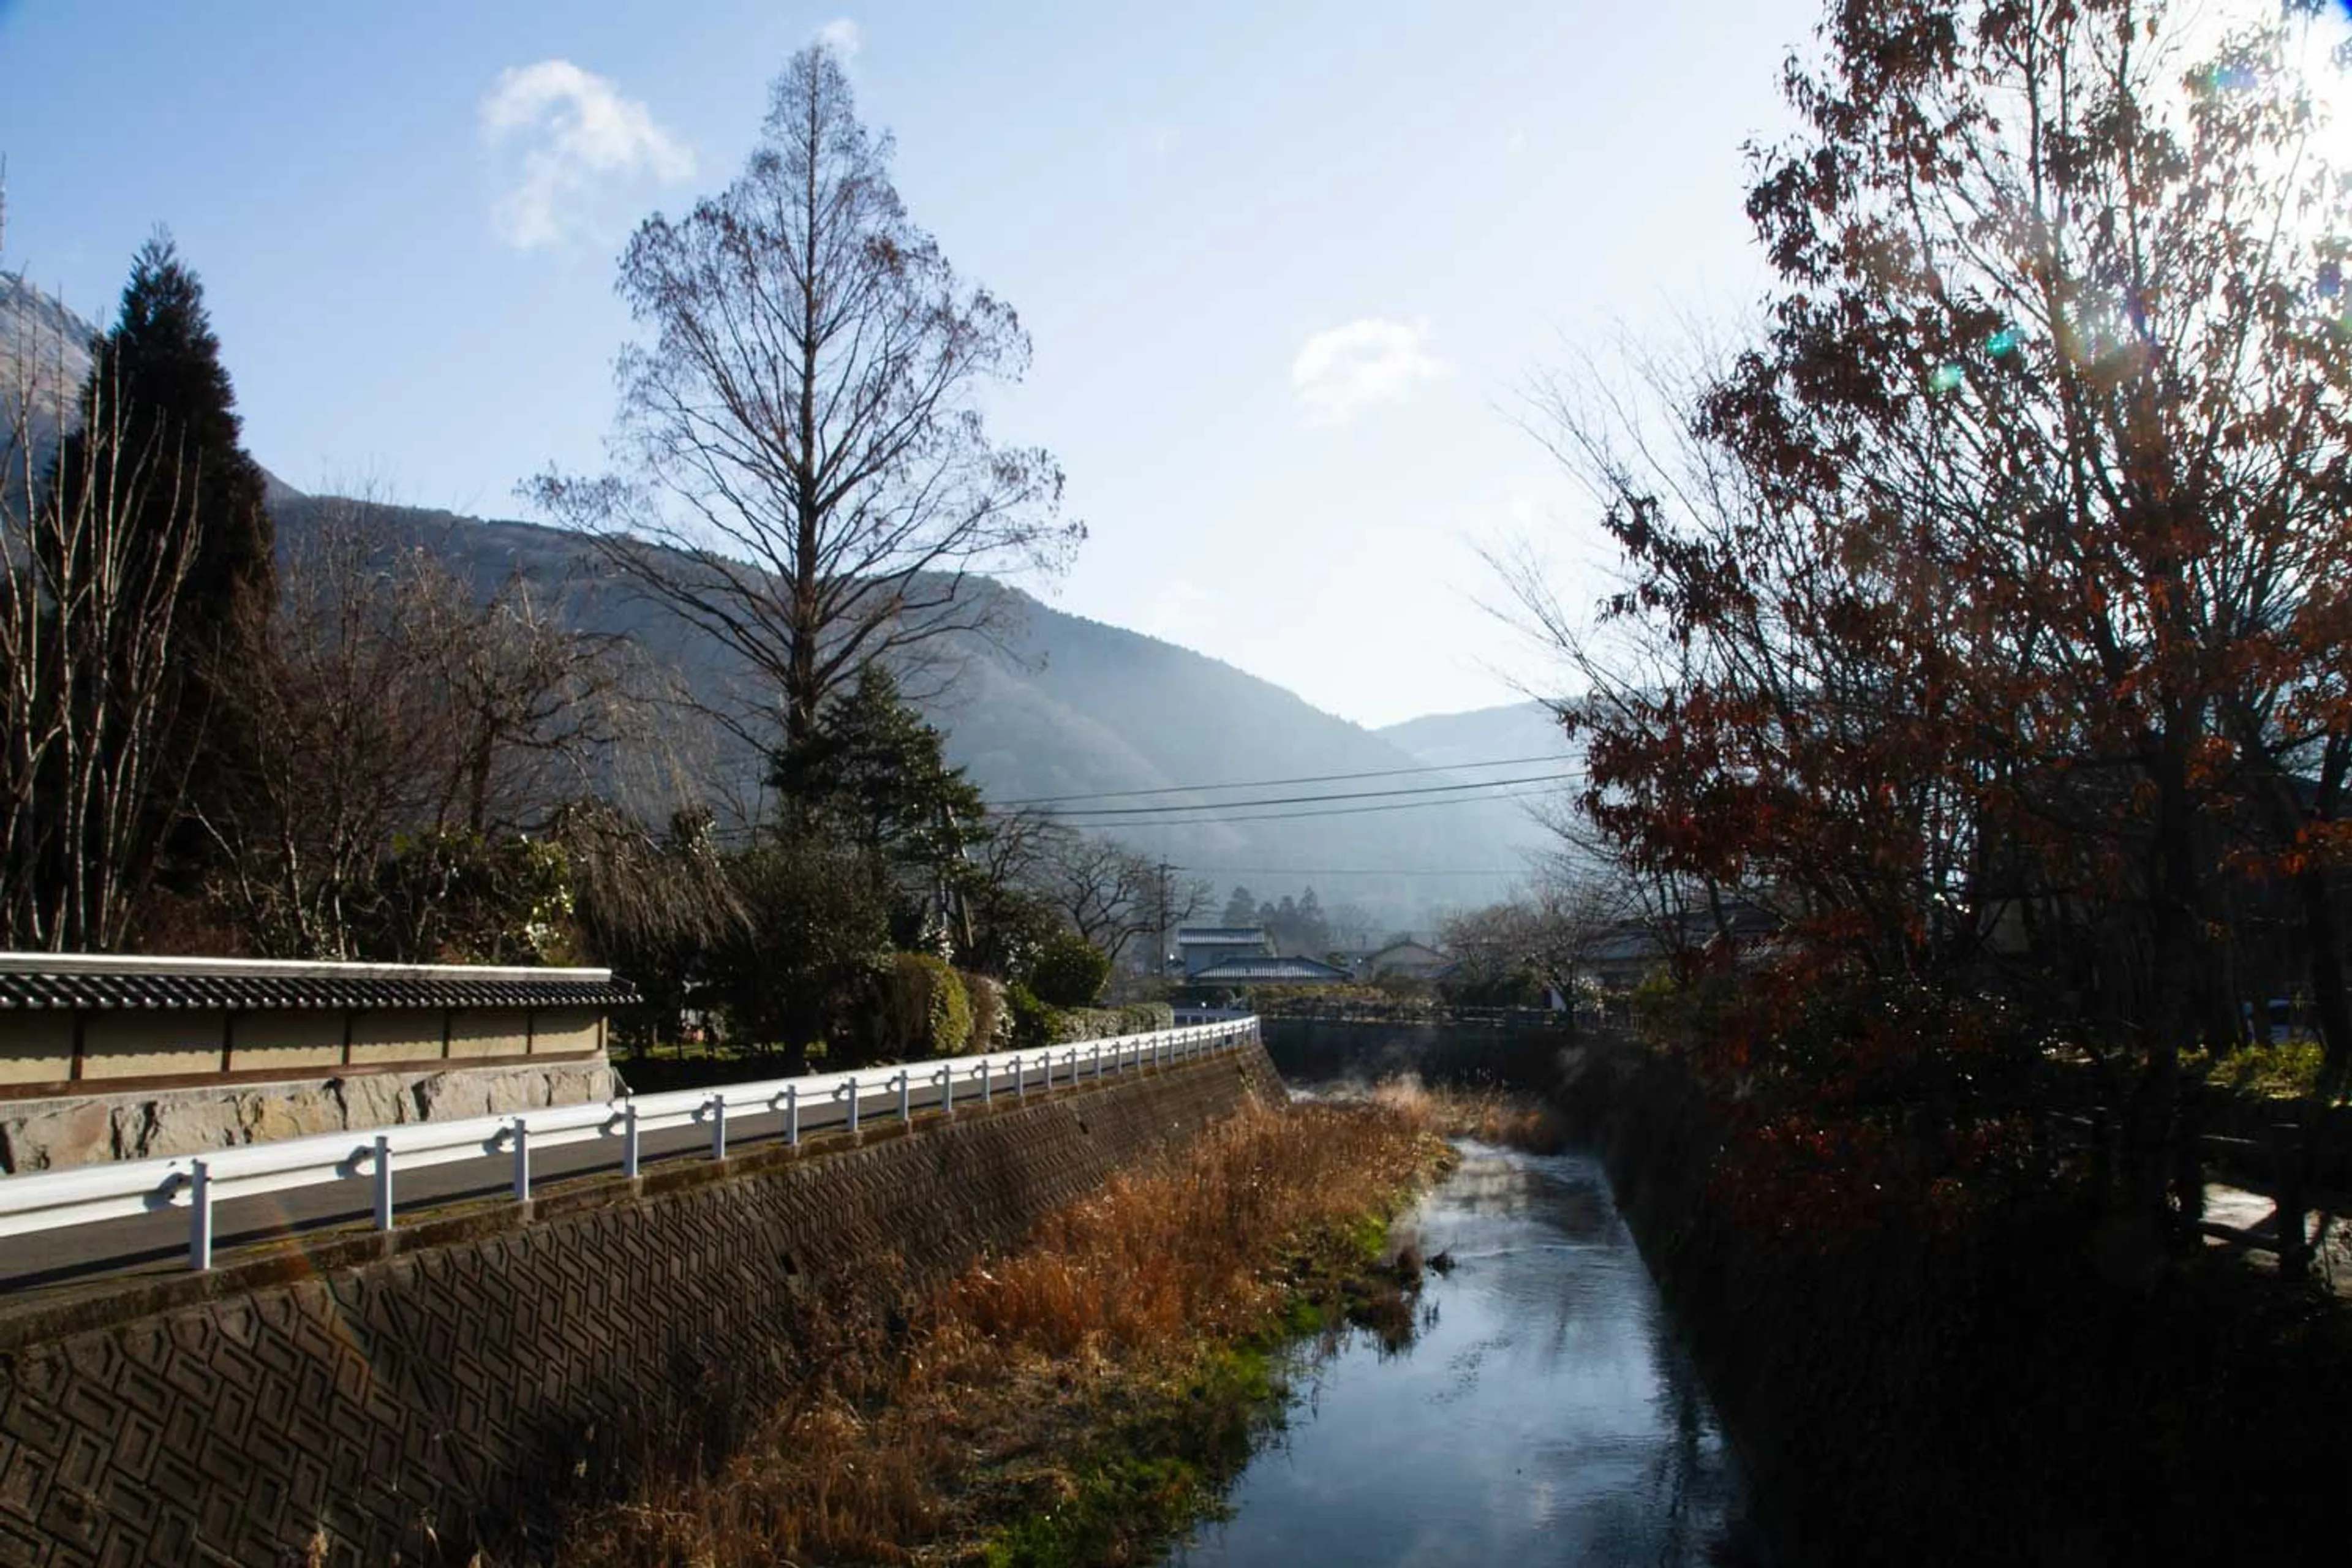 A river runs through the Eastern side of Yufuin.